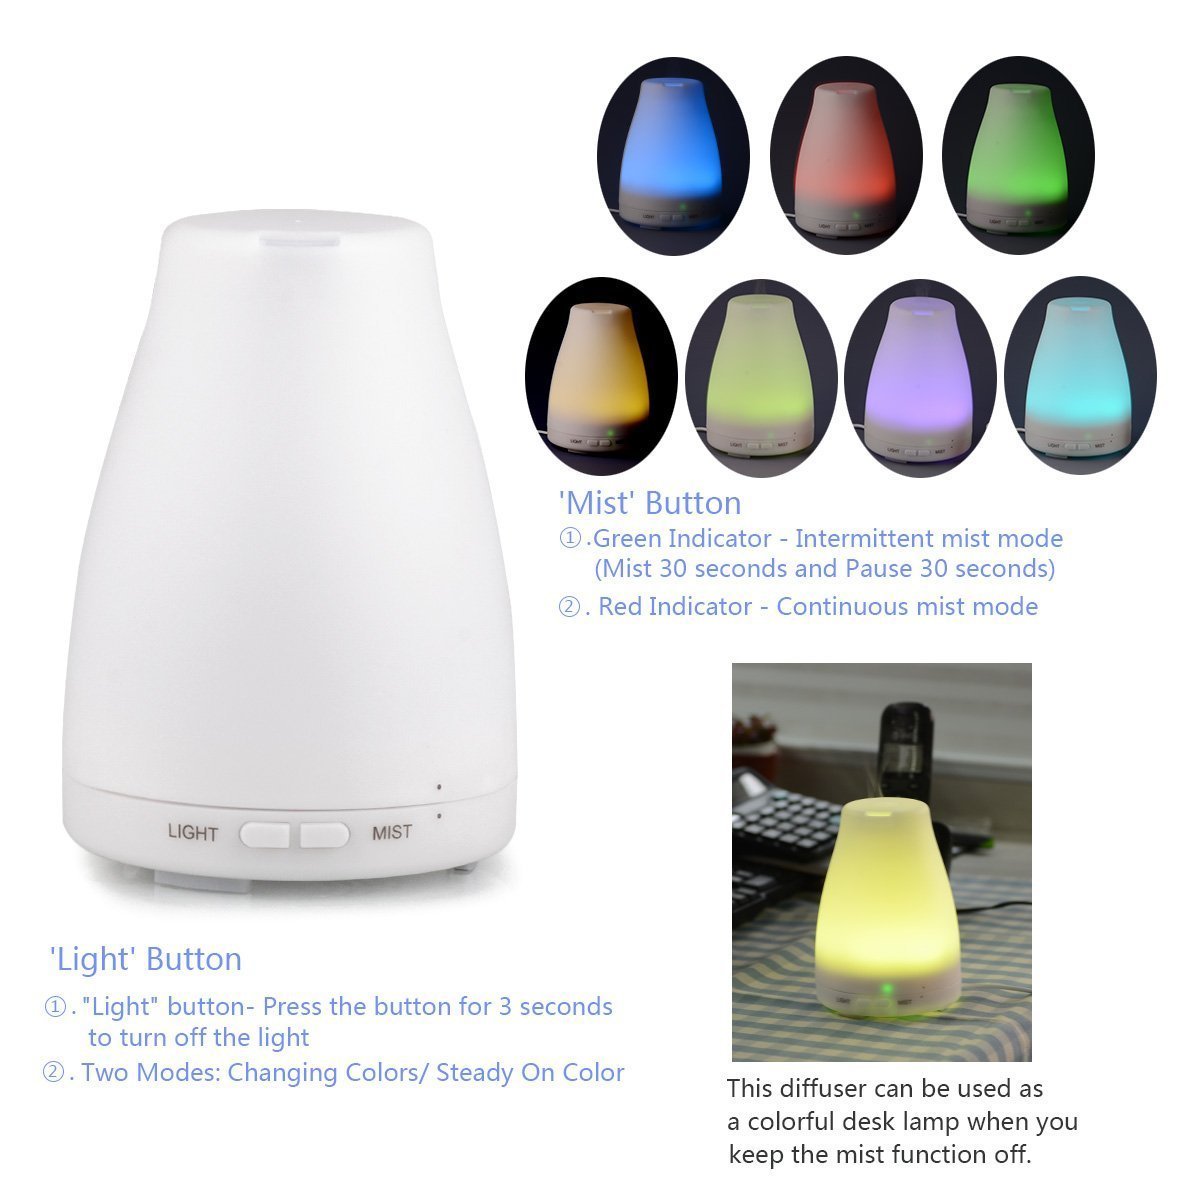 AGPtek Oil Aromatherapy Diffuser Ultrasonic Humidifier with 7 Color Changing LED Waterless Auto Shut-off - image 5 of 7